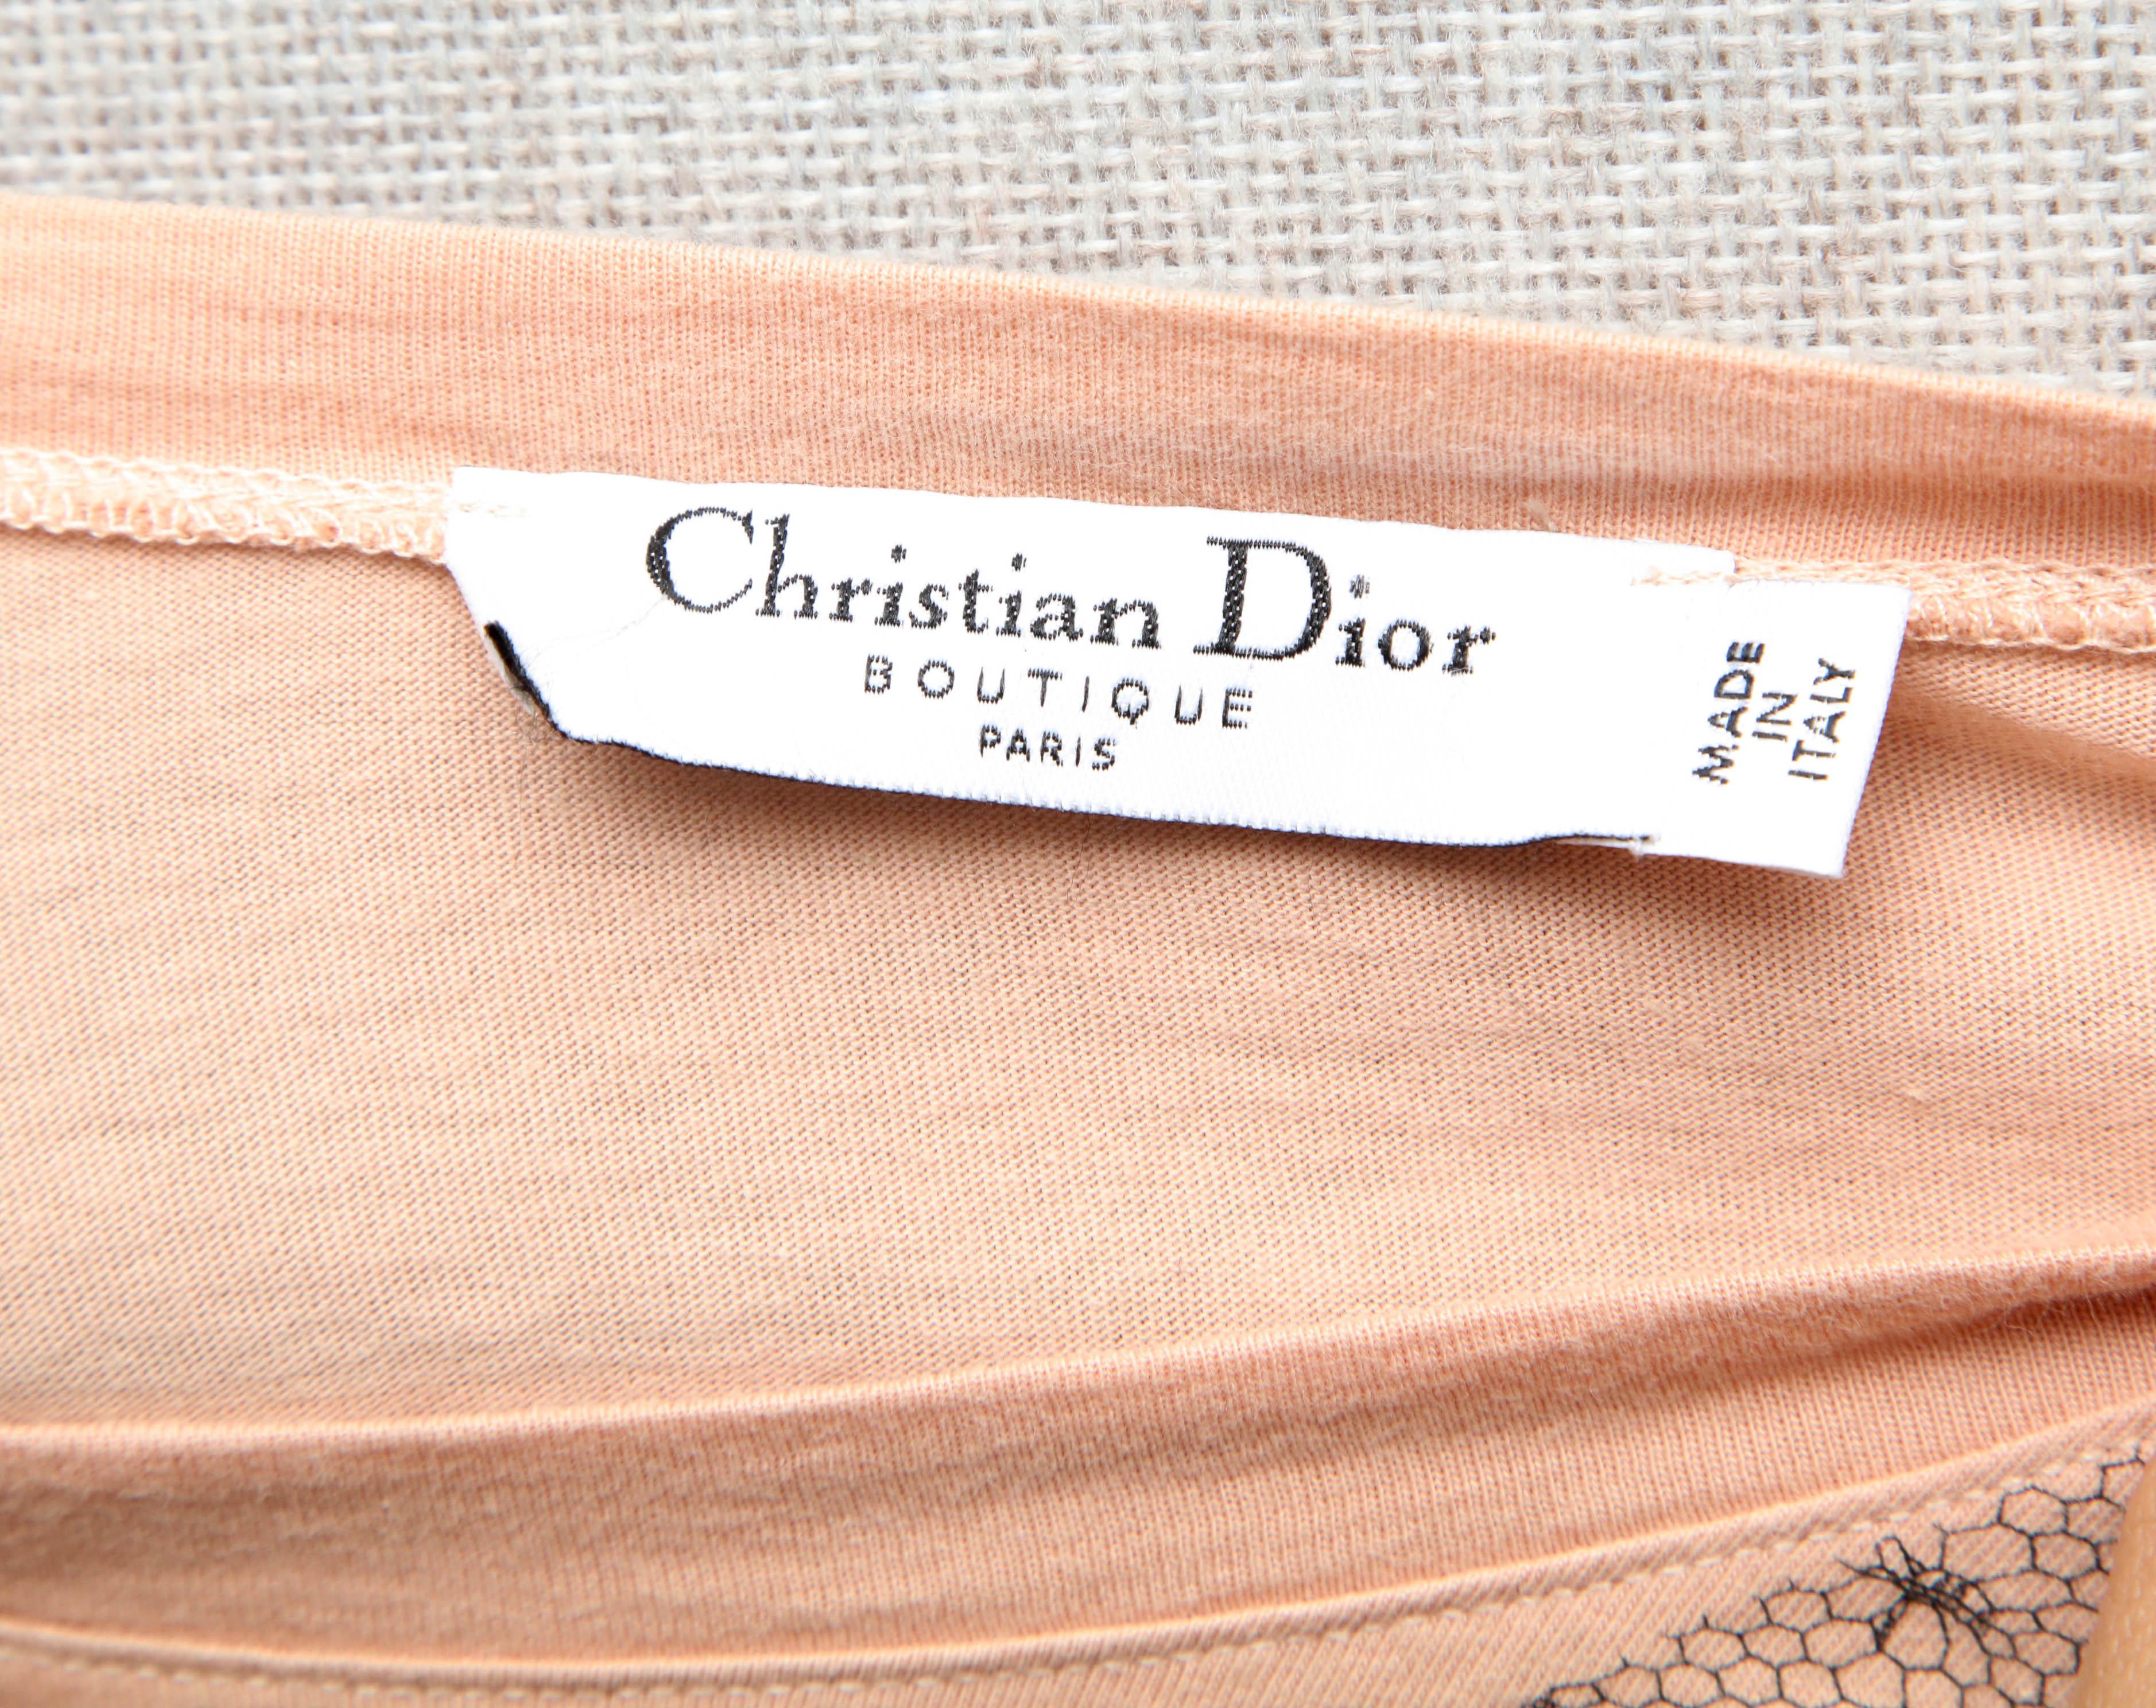 Rare Christian Dior by John Galliano t-shirt with Trompe L'oeil details. 
French size 36